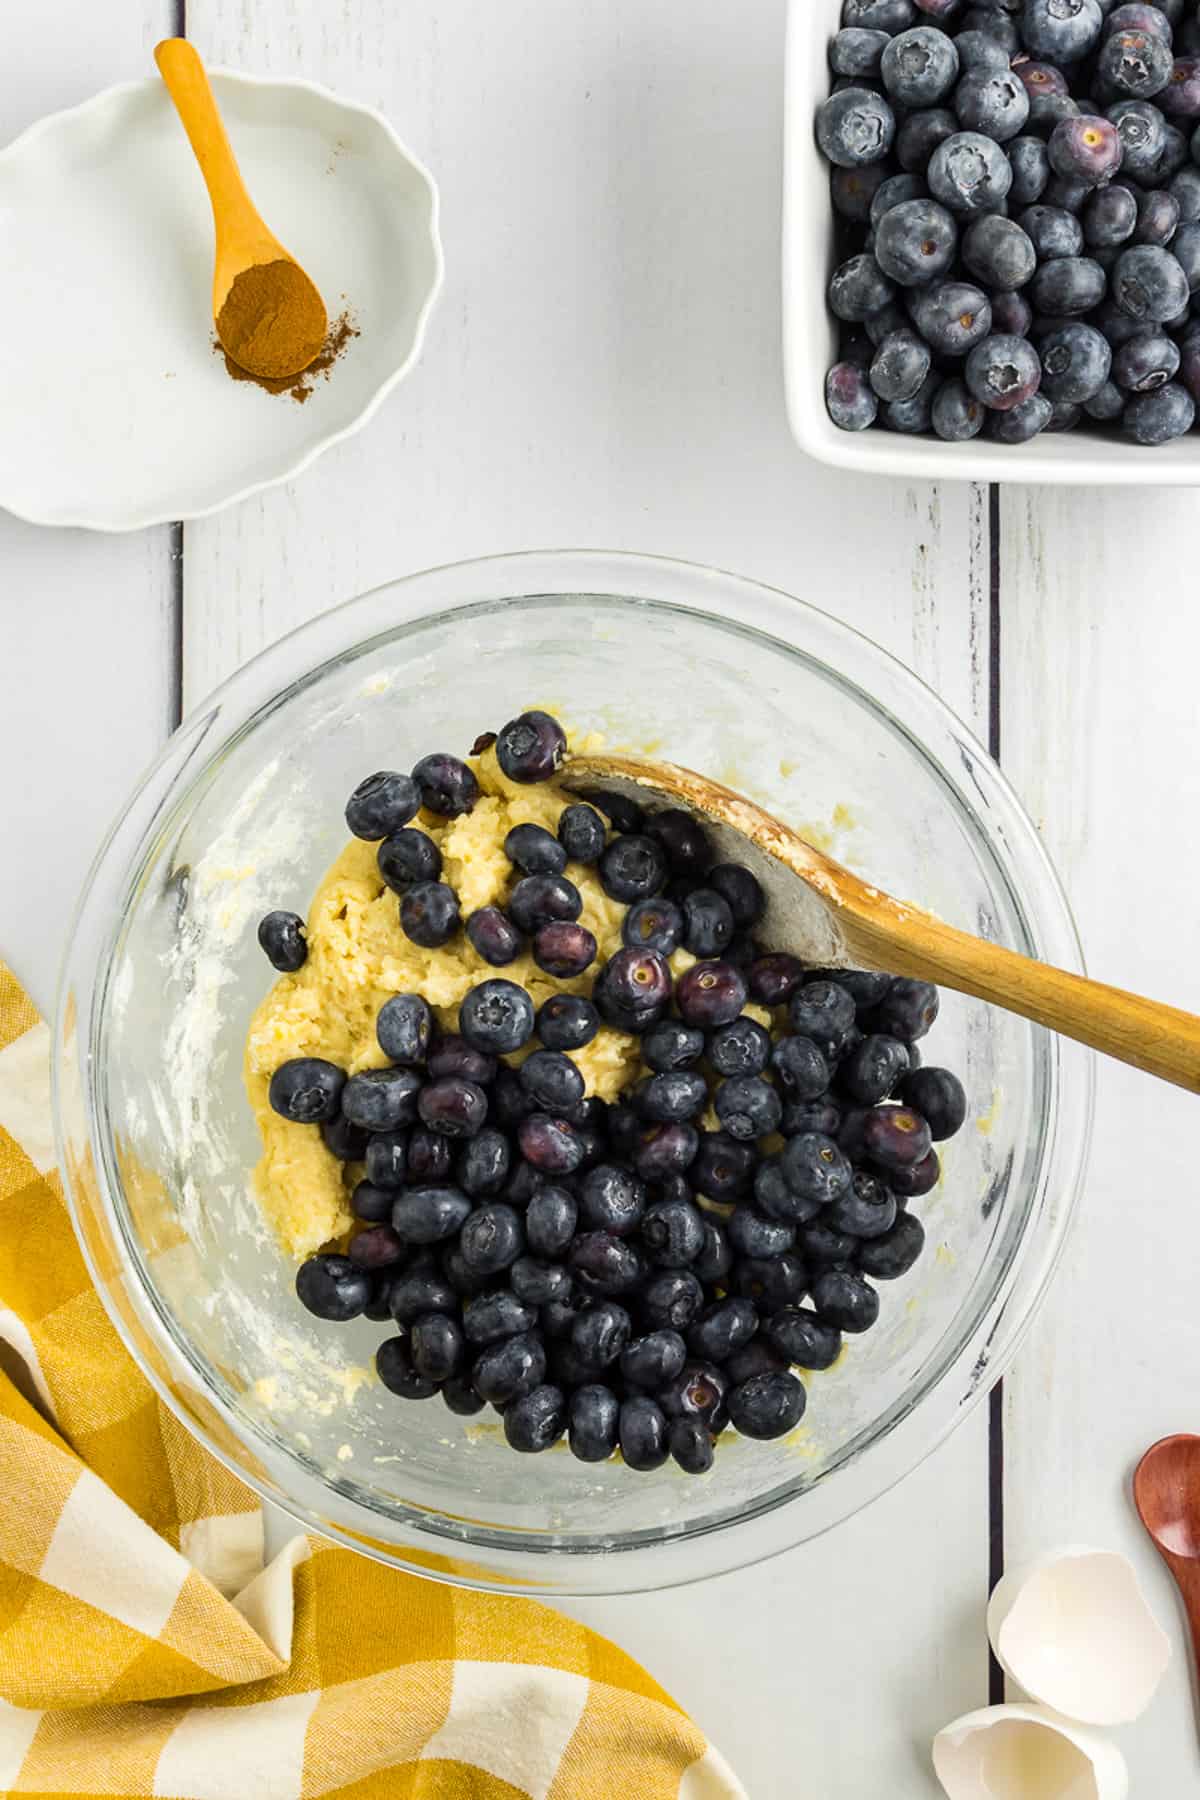 Folding blueberries into a bowl of batter